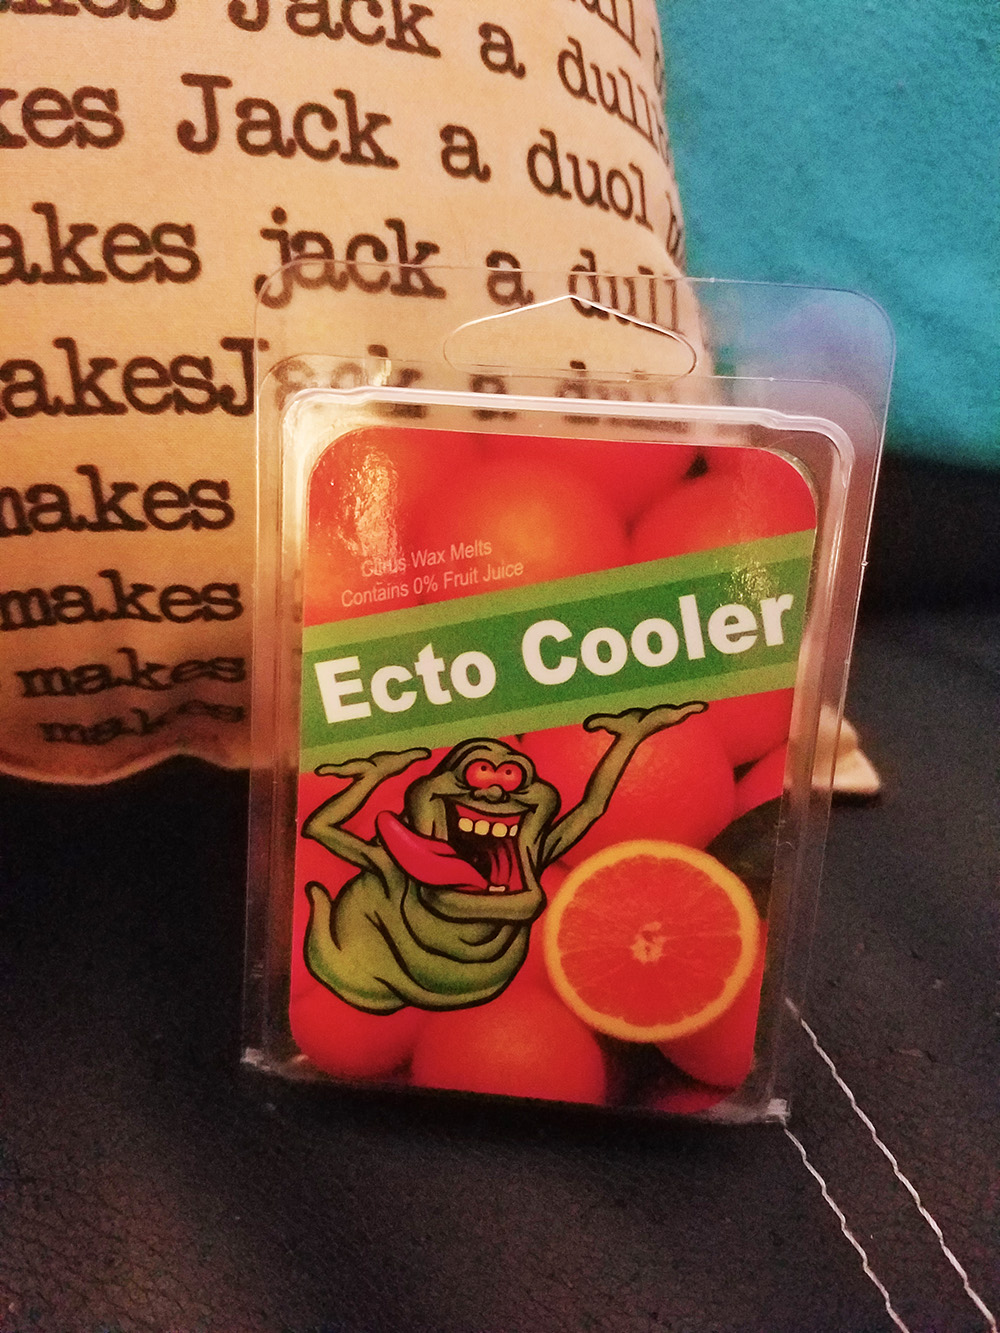 Ecto Cooler Wax Melts from HorrorDecor, featured here with their The Shining pillow.